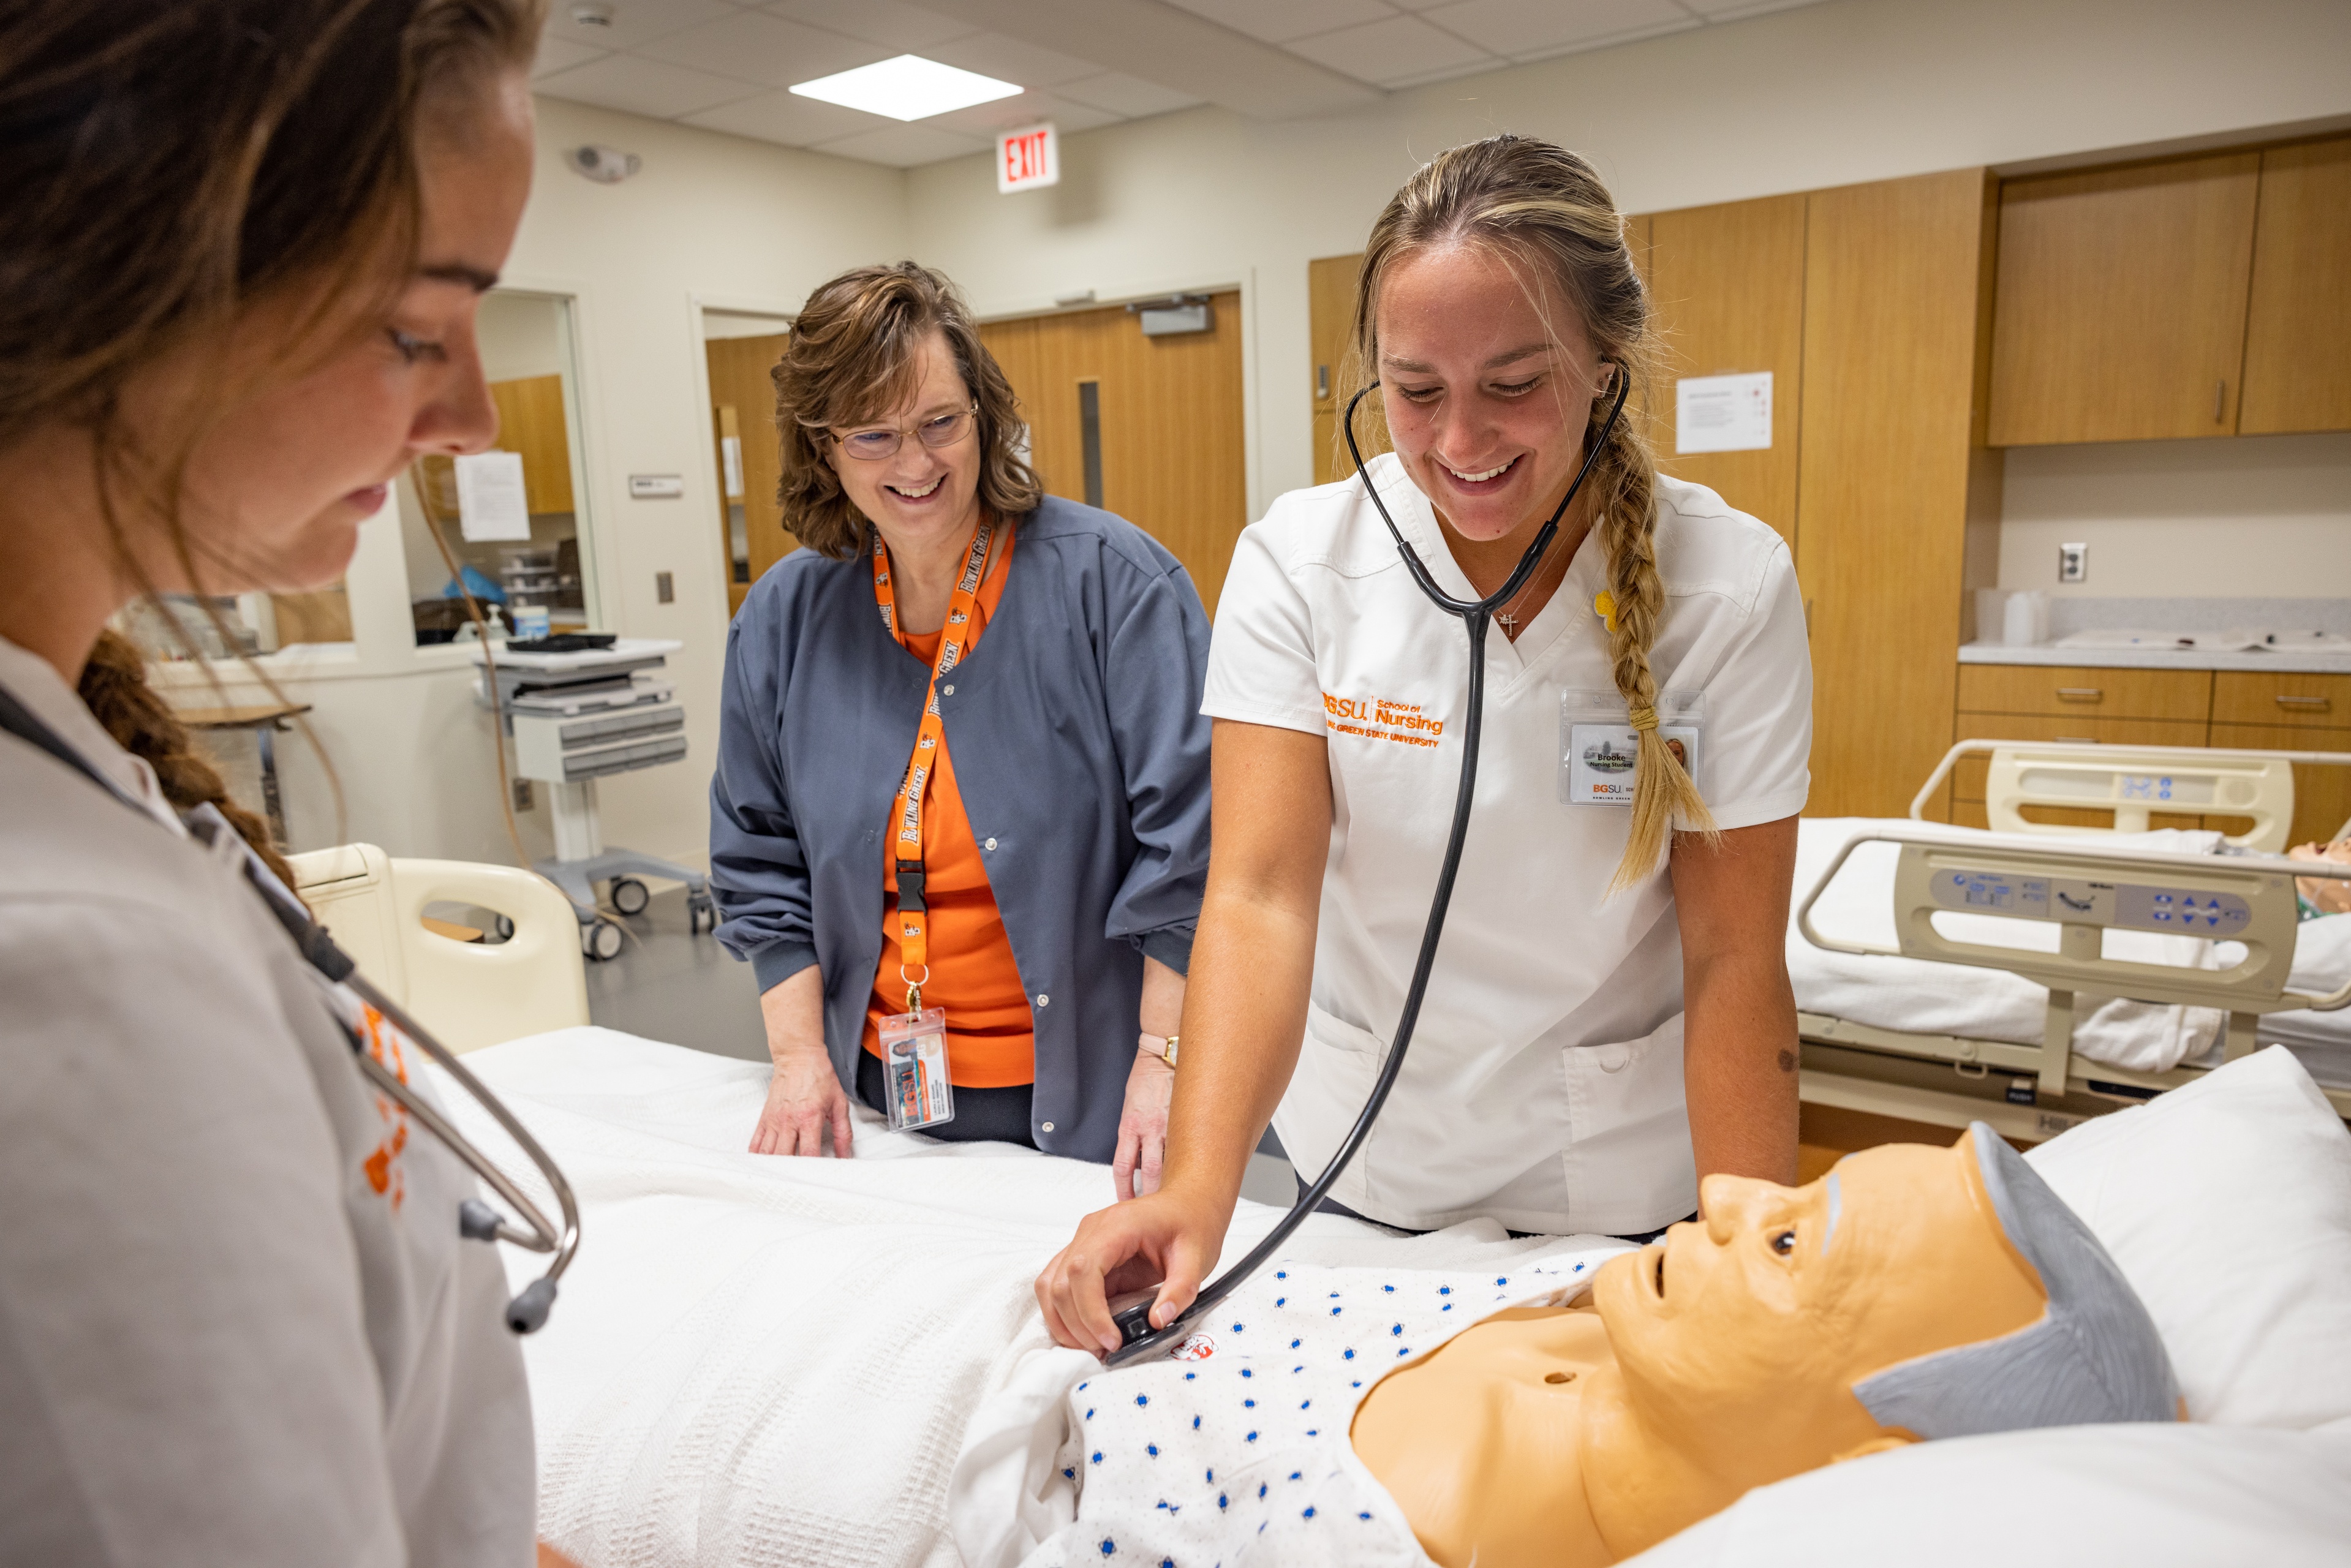 BGSU alumna Laura Bogard '22 earned her RN to BSN degree after more than 30 years in nursing and now works in the skills lab in Central Hall assisting students with nursing skills (BGSU photo/Craig Bell)